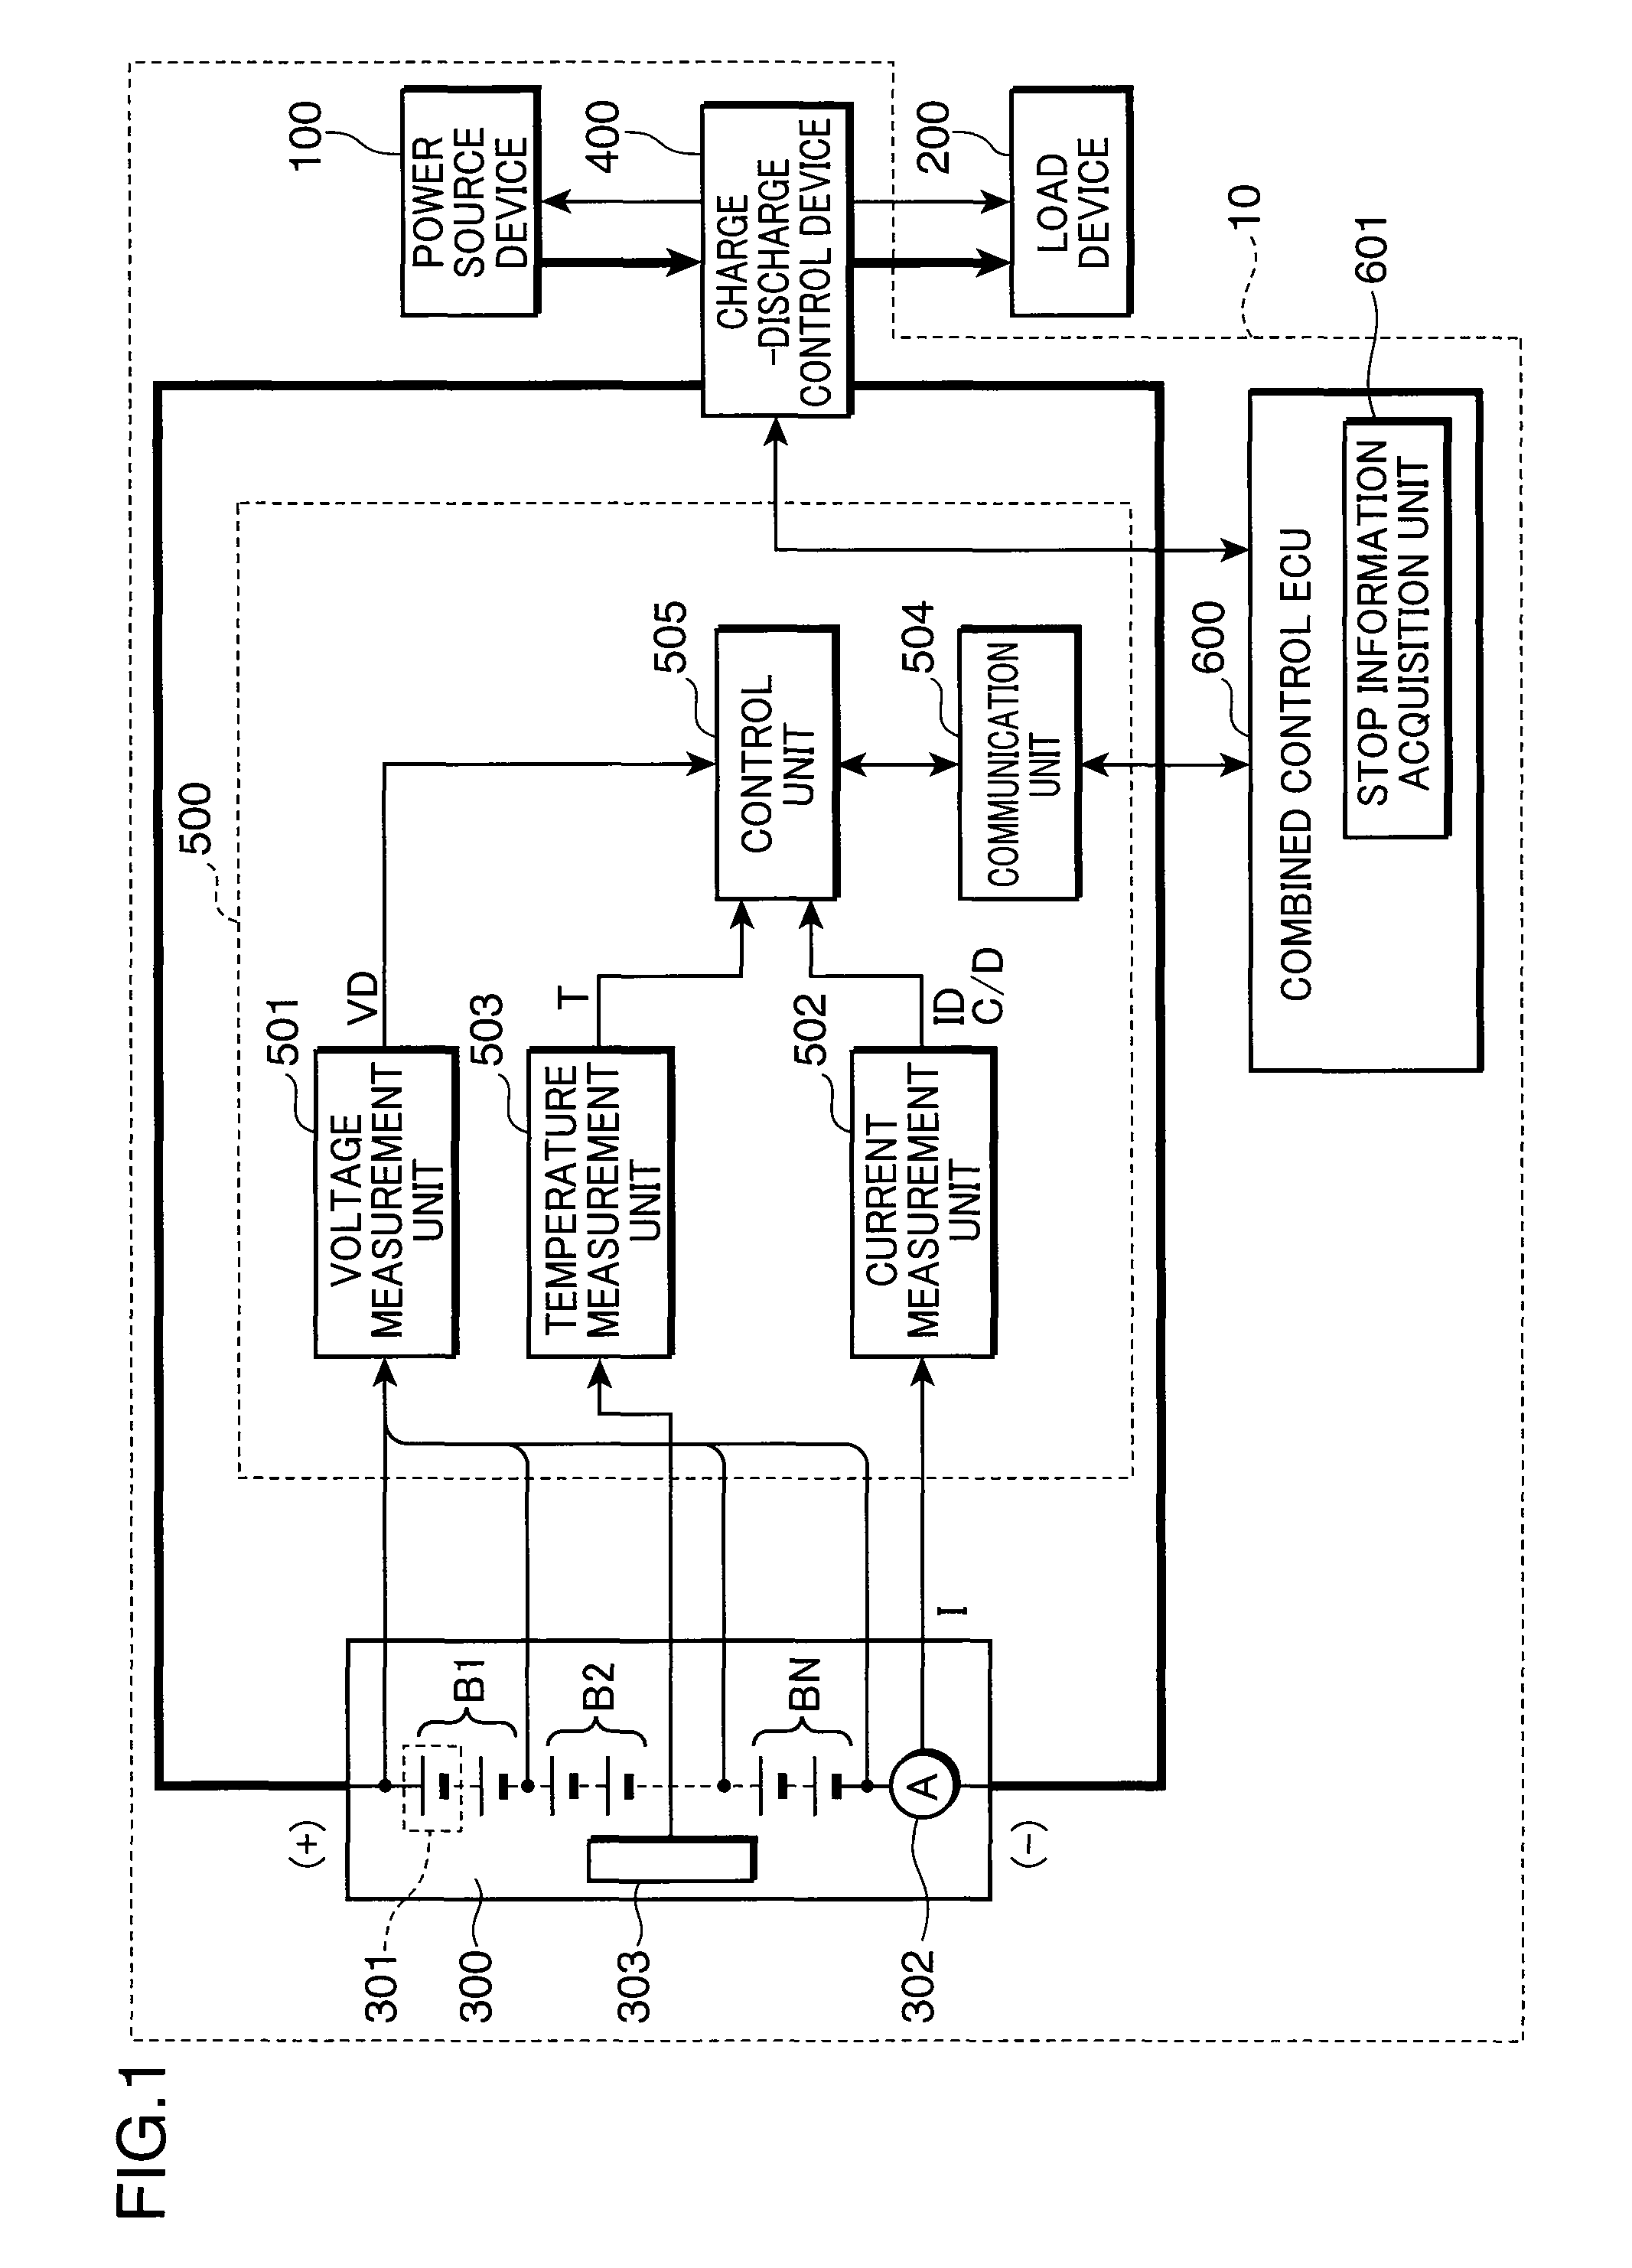 Power source system, power supply control method for the power source system, power supply control program for the power source system, and computer-readable recording medium with the power supply control program recorded thereon